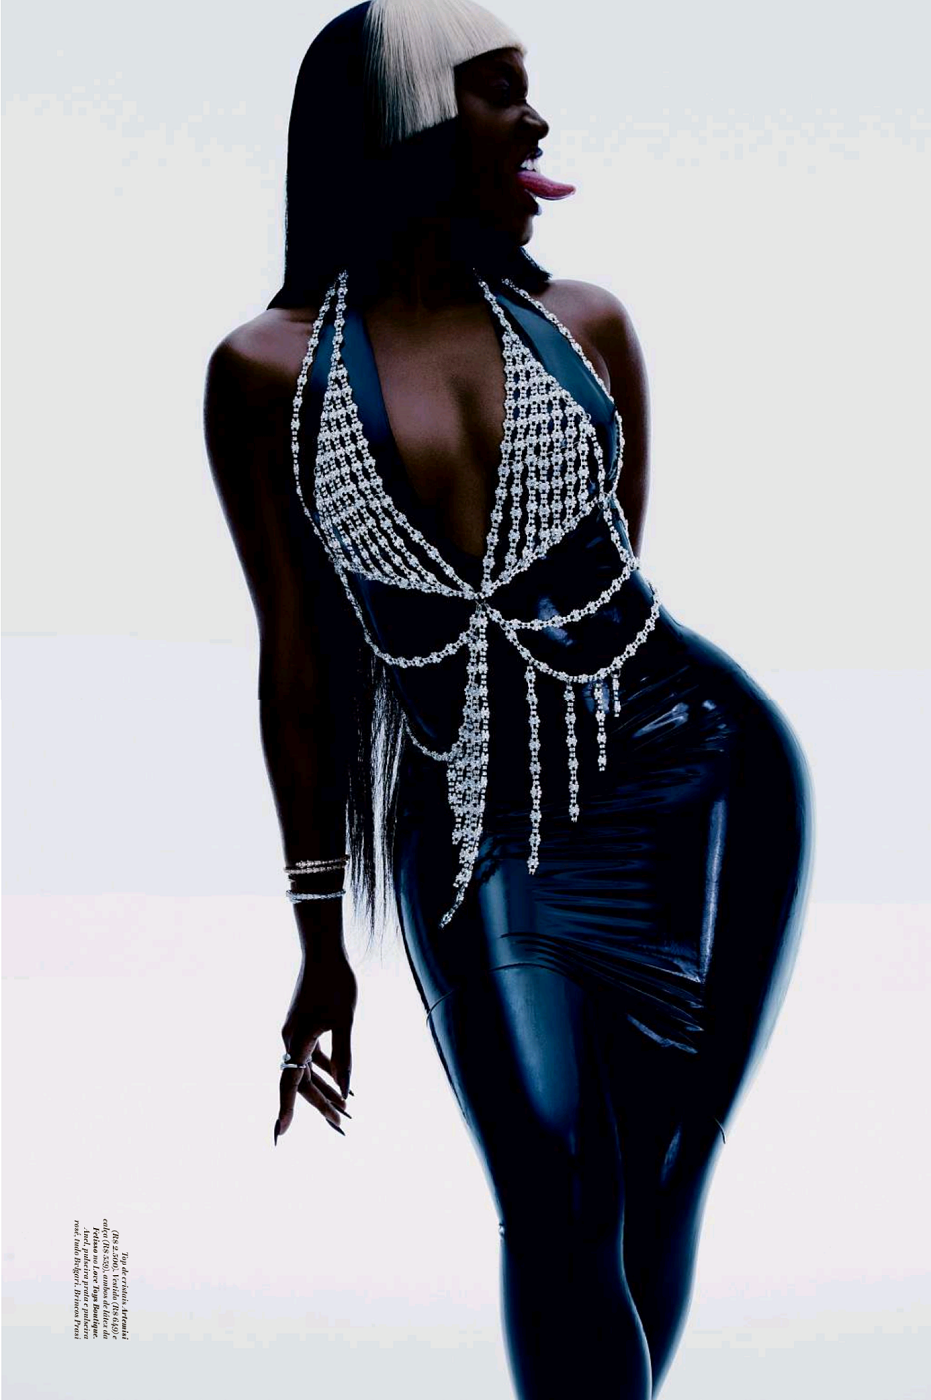 Iza-by-Lufre-in-Vogue Brazil-July-2022 (5).png